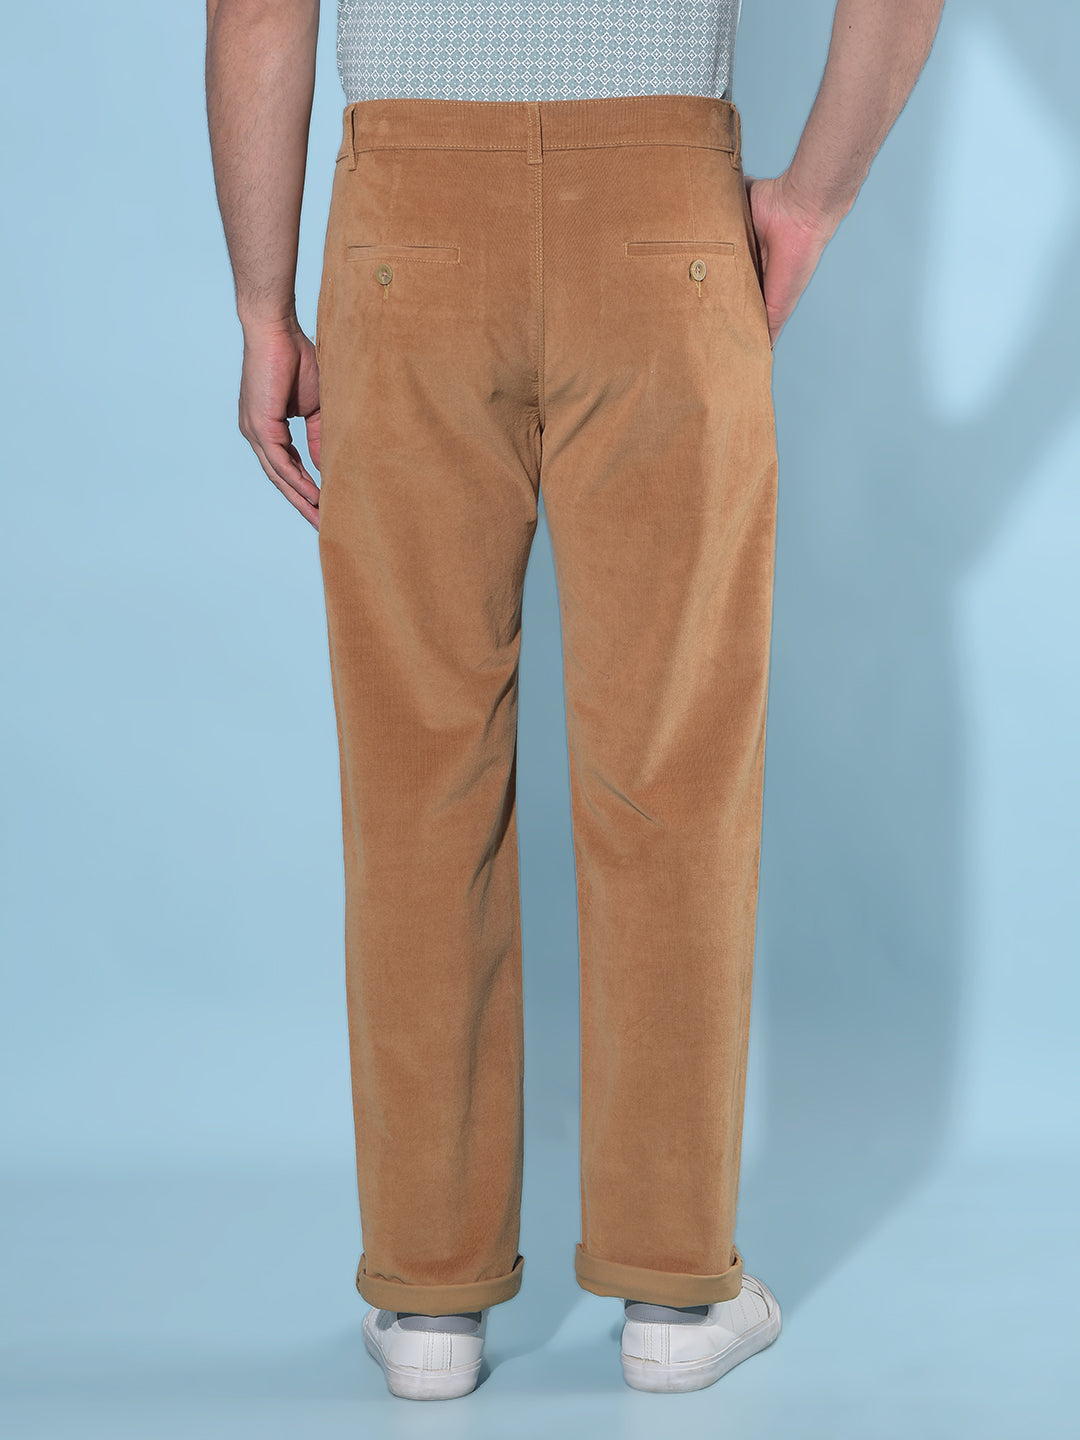 Beige Straight Stretchable Trousers-Men Trousers-Crimsoune Club